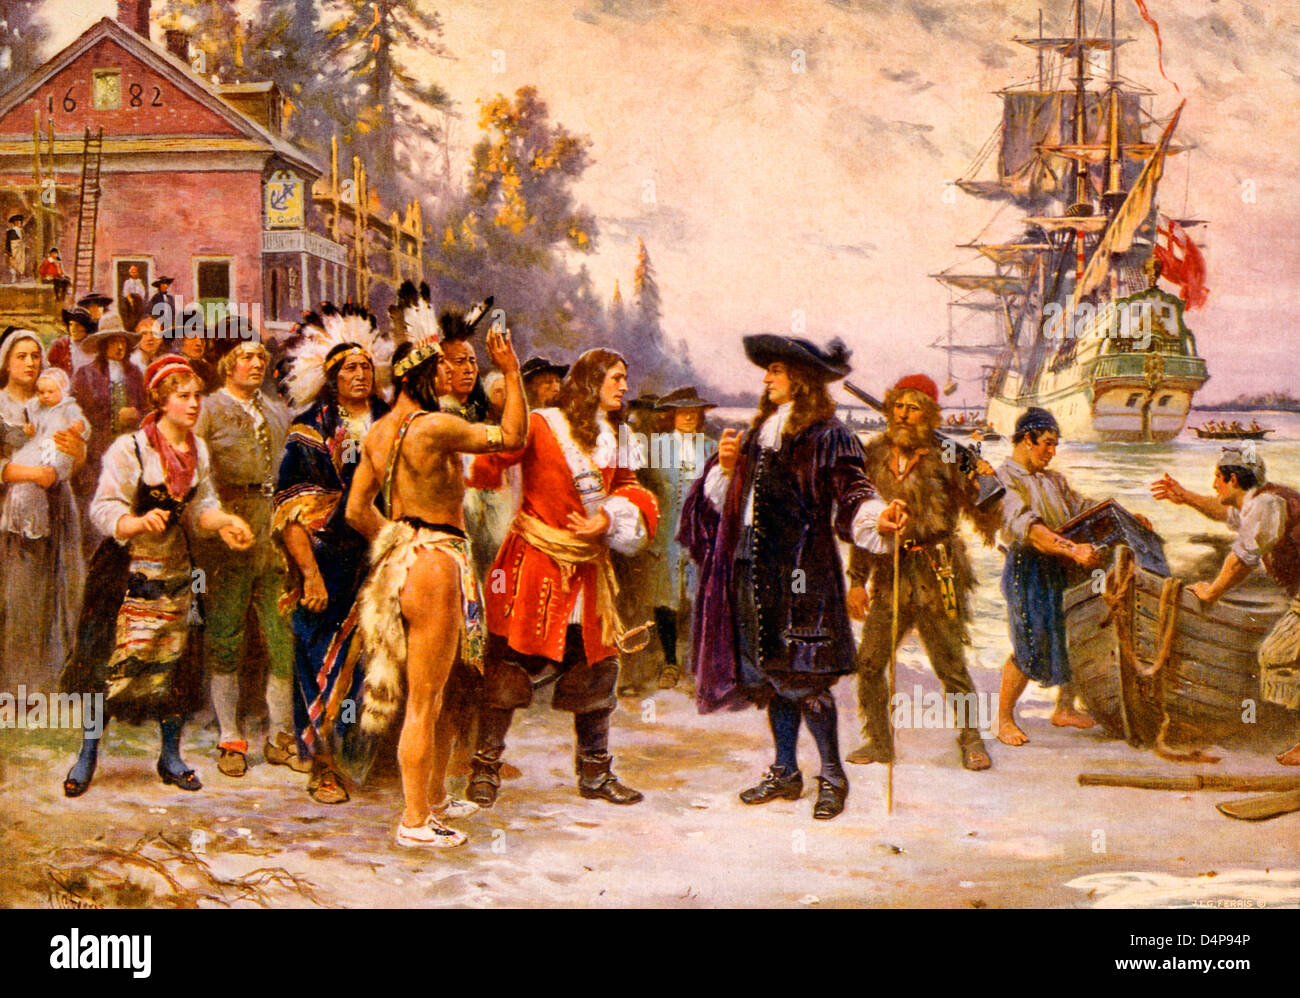 The landing of William Penn - William Penn, in 1682, standing on shore greeted by large group of men and women, including Native Americans. Stock Photo